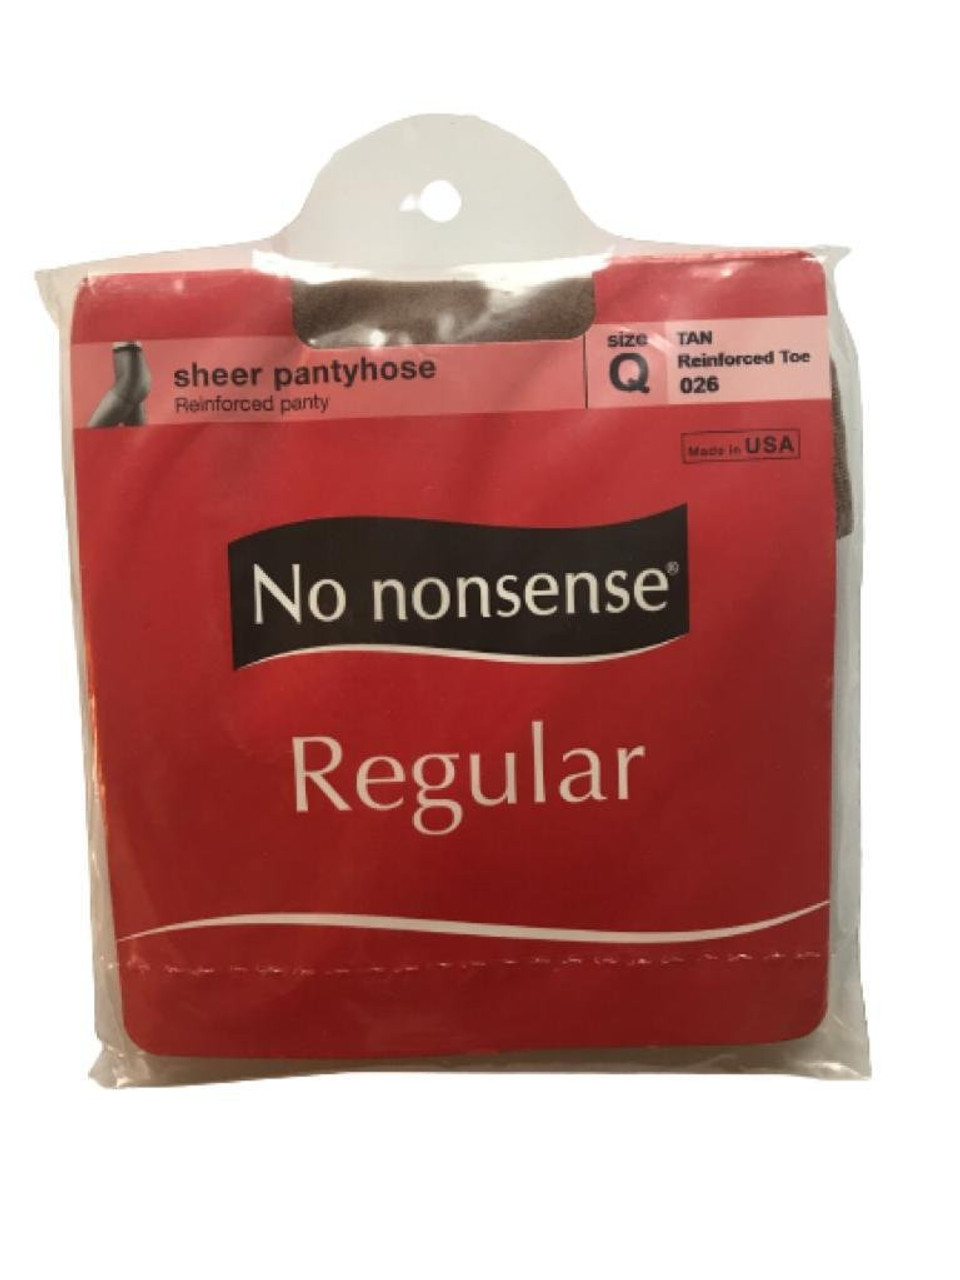 No nonsense womens Regular Pantyhose With Reinforced Panty and Toe